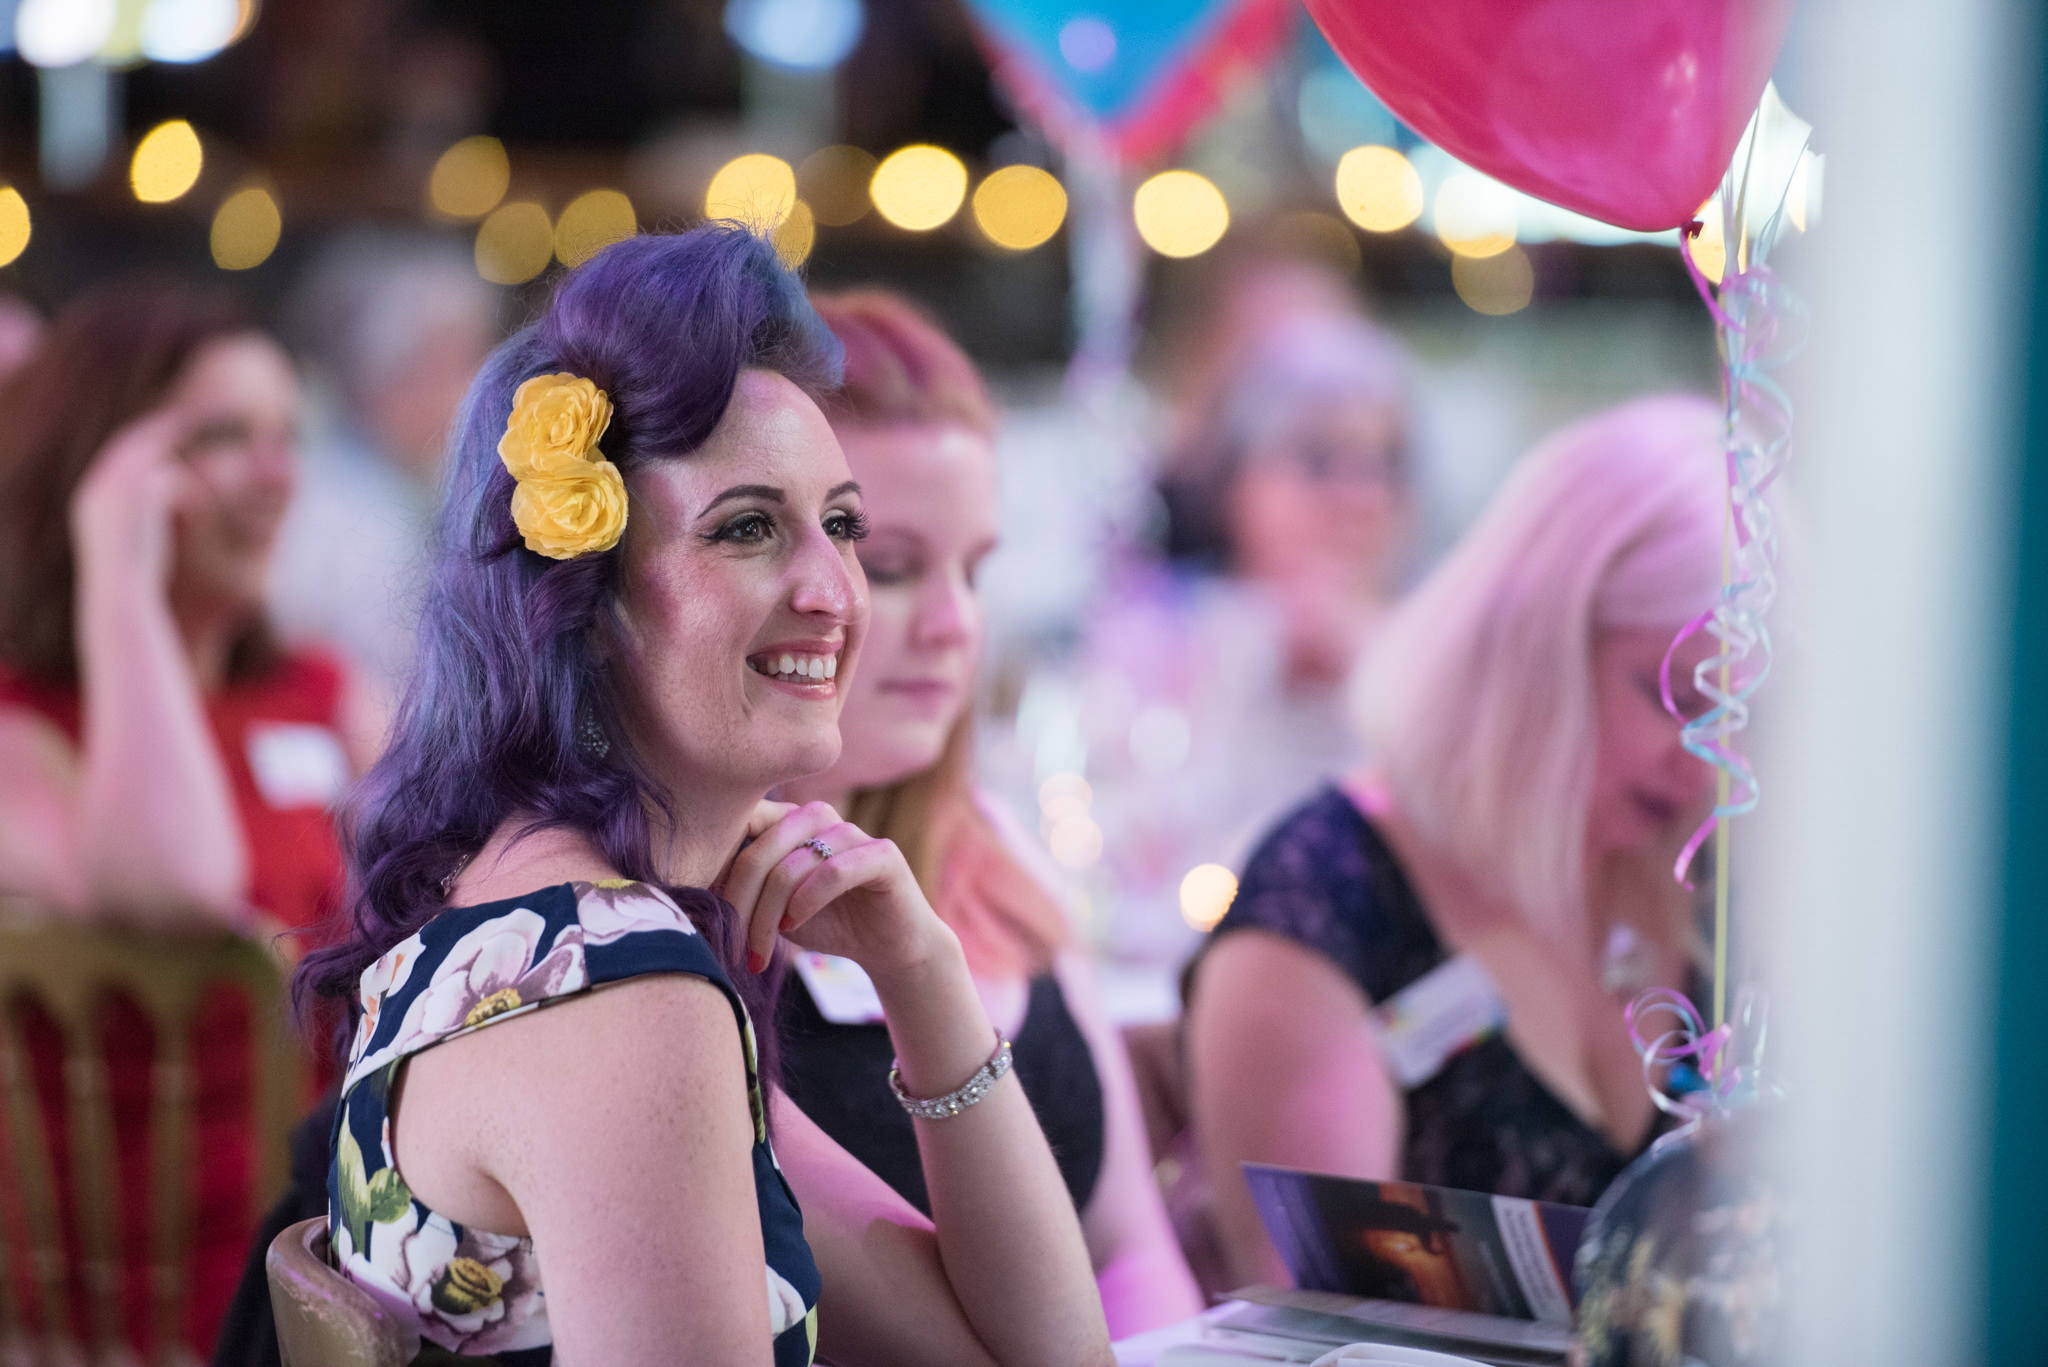 scottish-women-in-business-awards-candid-event-photography-glamorous-audience.jpg